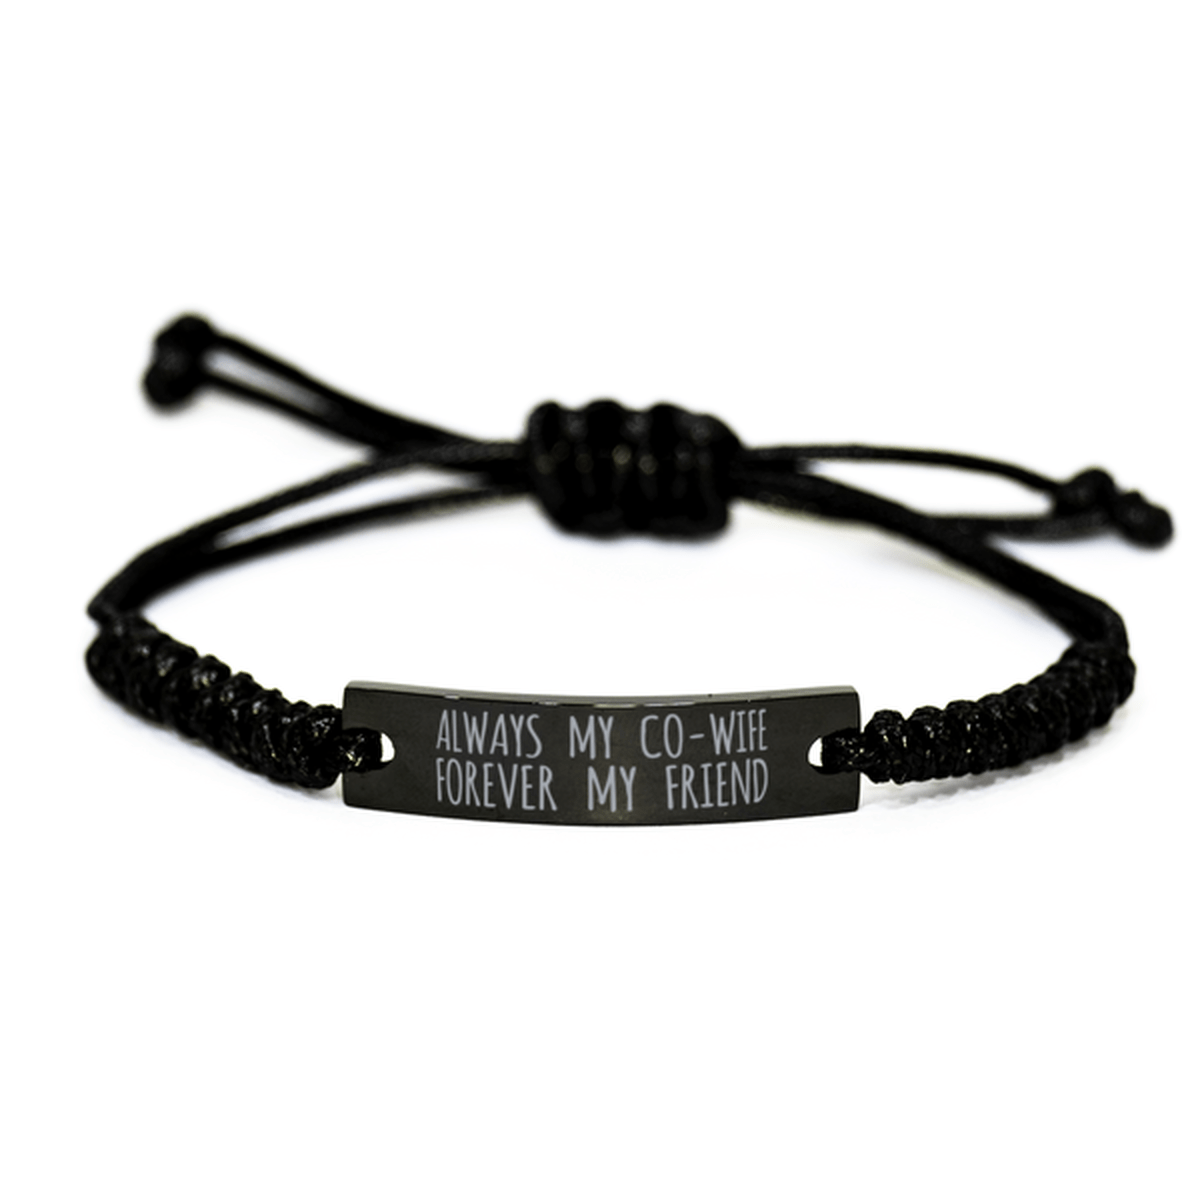 Inspirational Co-Wife Black Rope Bracelet, Always My Co-Wife Forever My Friend, Best Birthday Gifts For Family